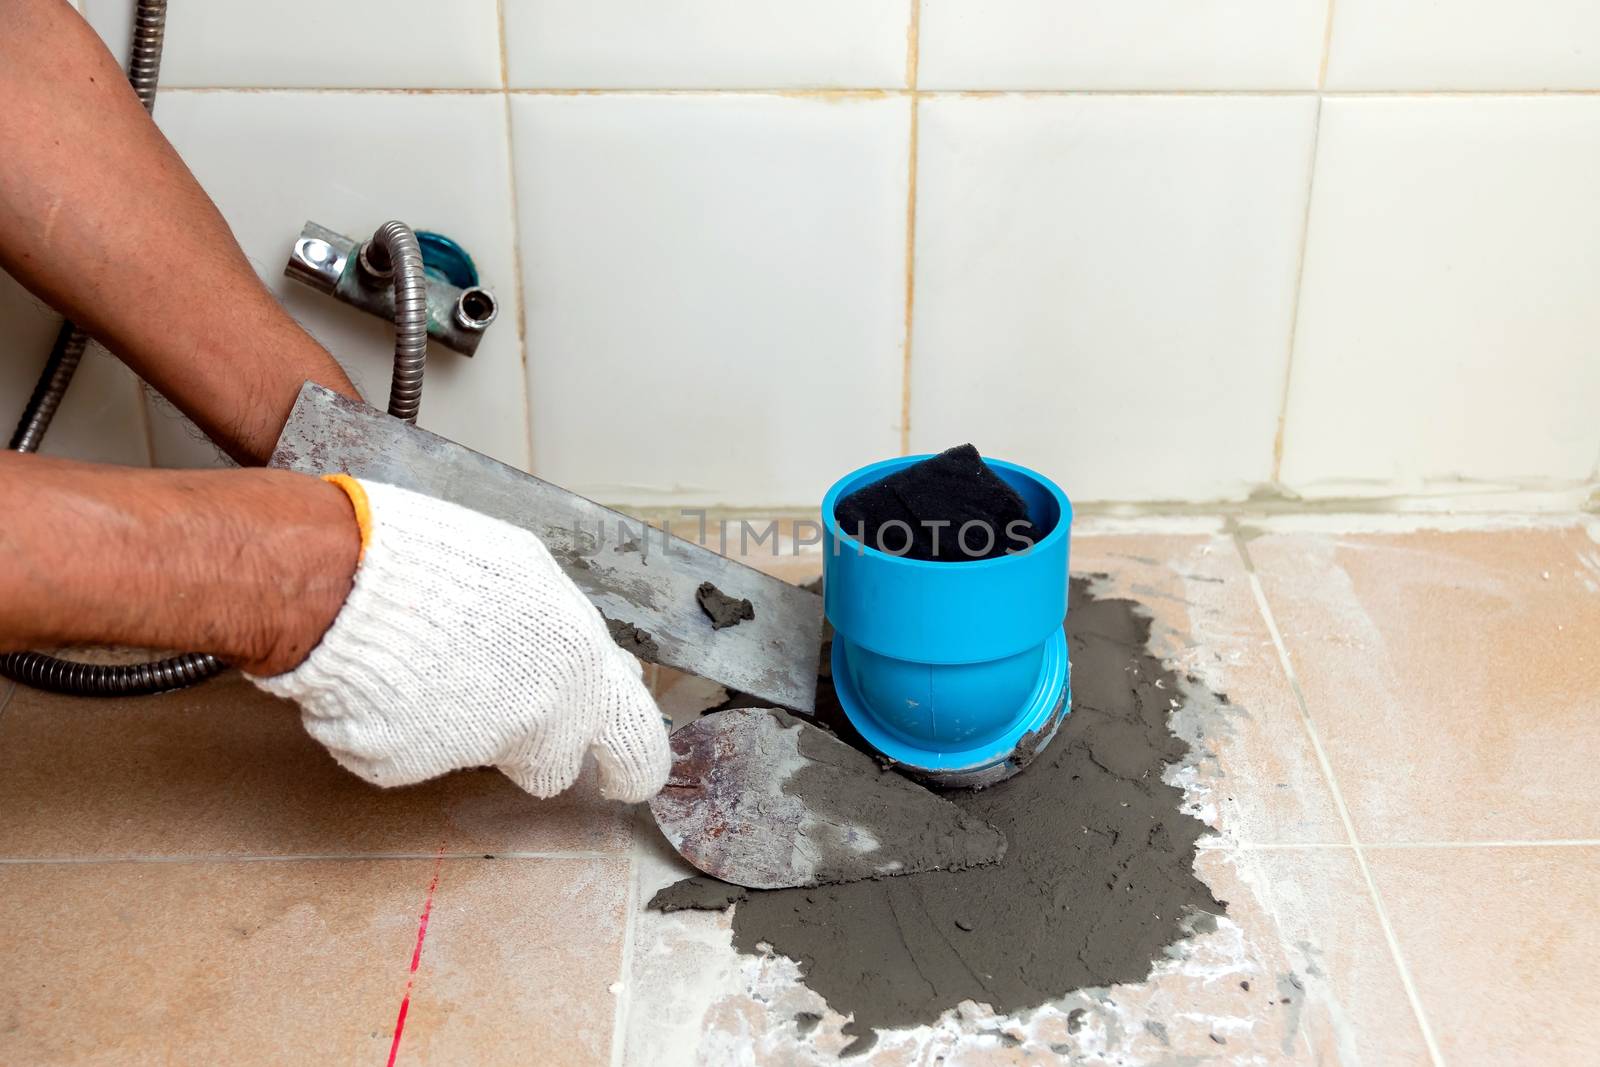 Construction workers are using plastering tools around the PVC pipe to drain the waste inside the bathroom.